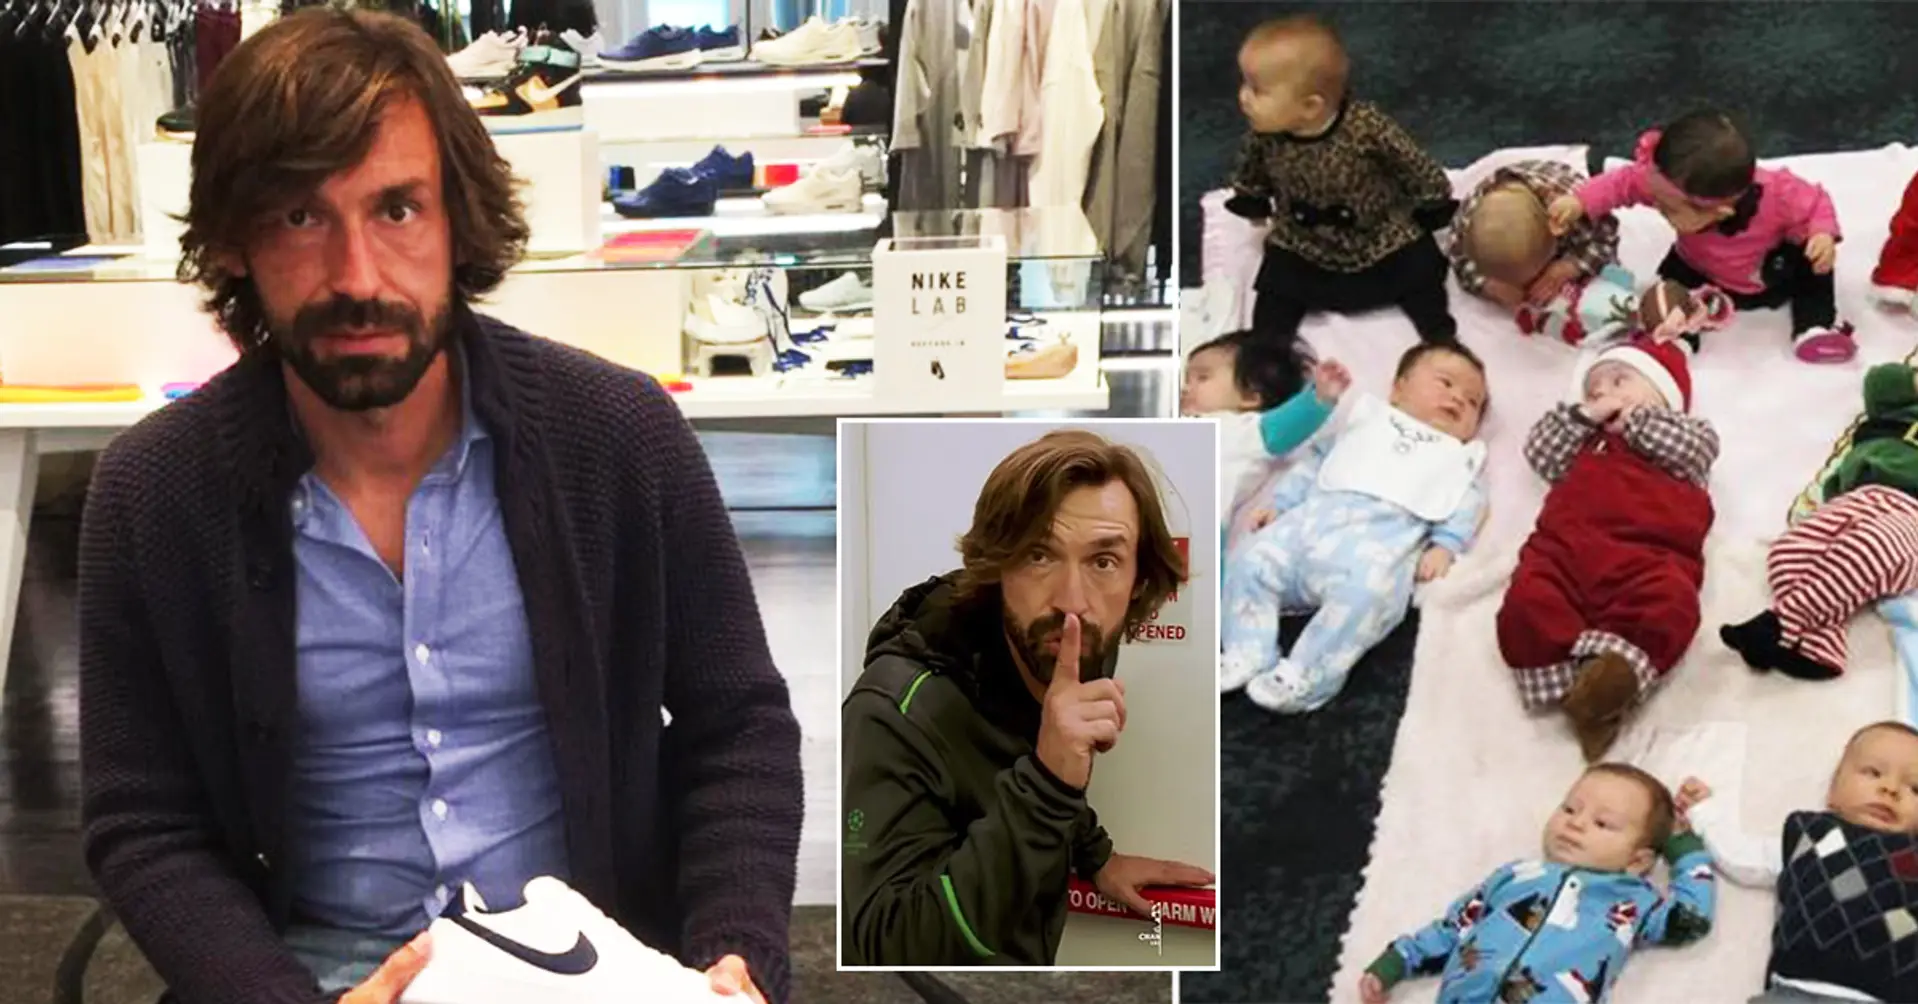 Fan who promised Andrea Pirlo to name his son after him officially announce that 'Little Pirlo' was born